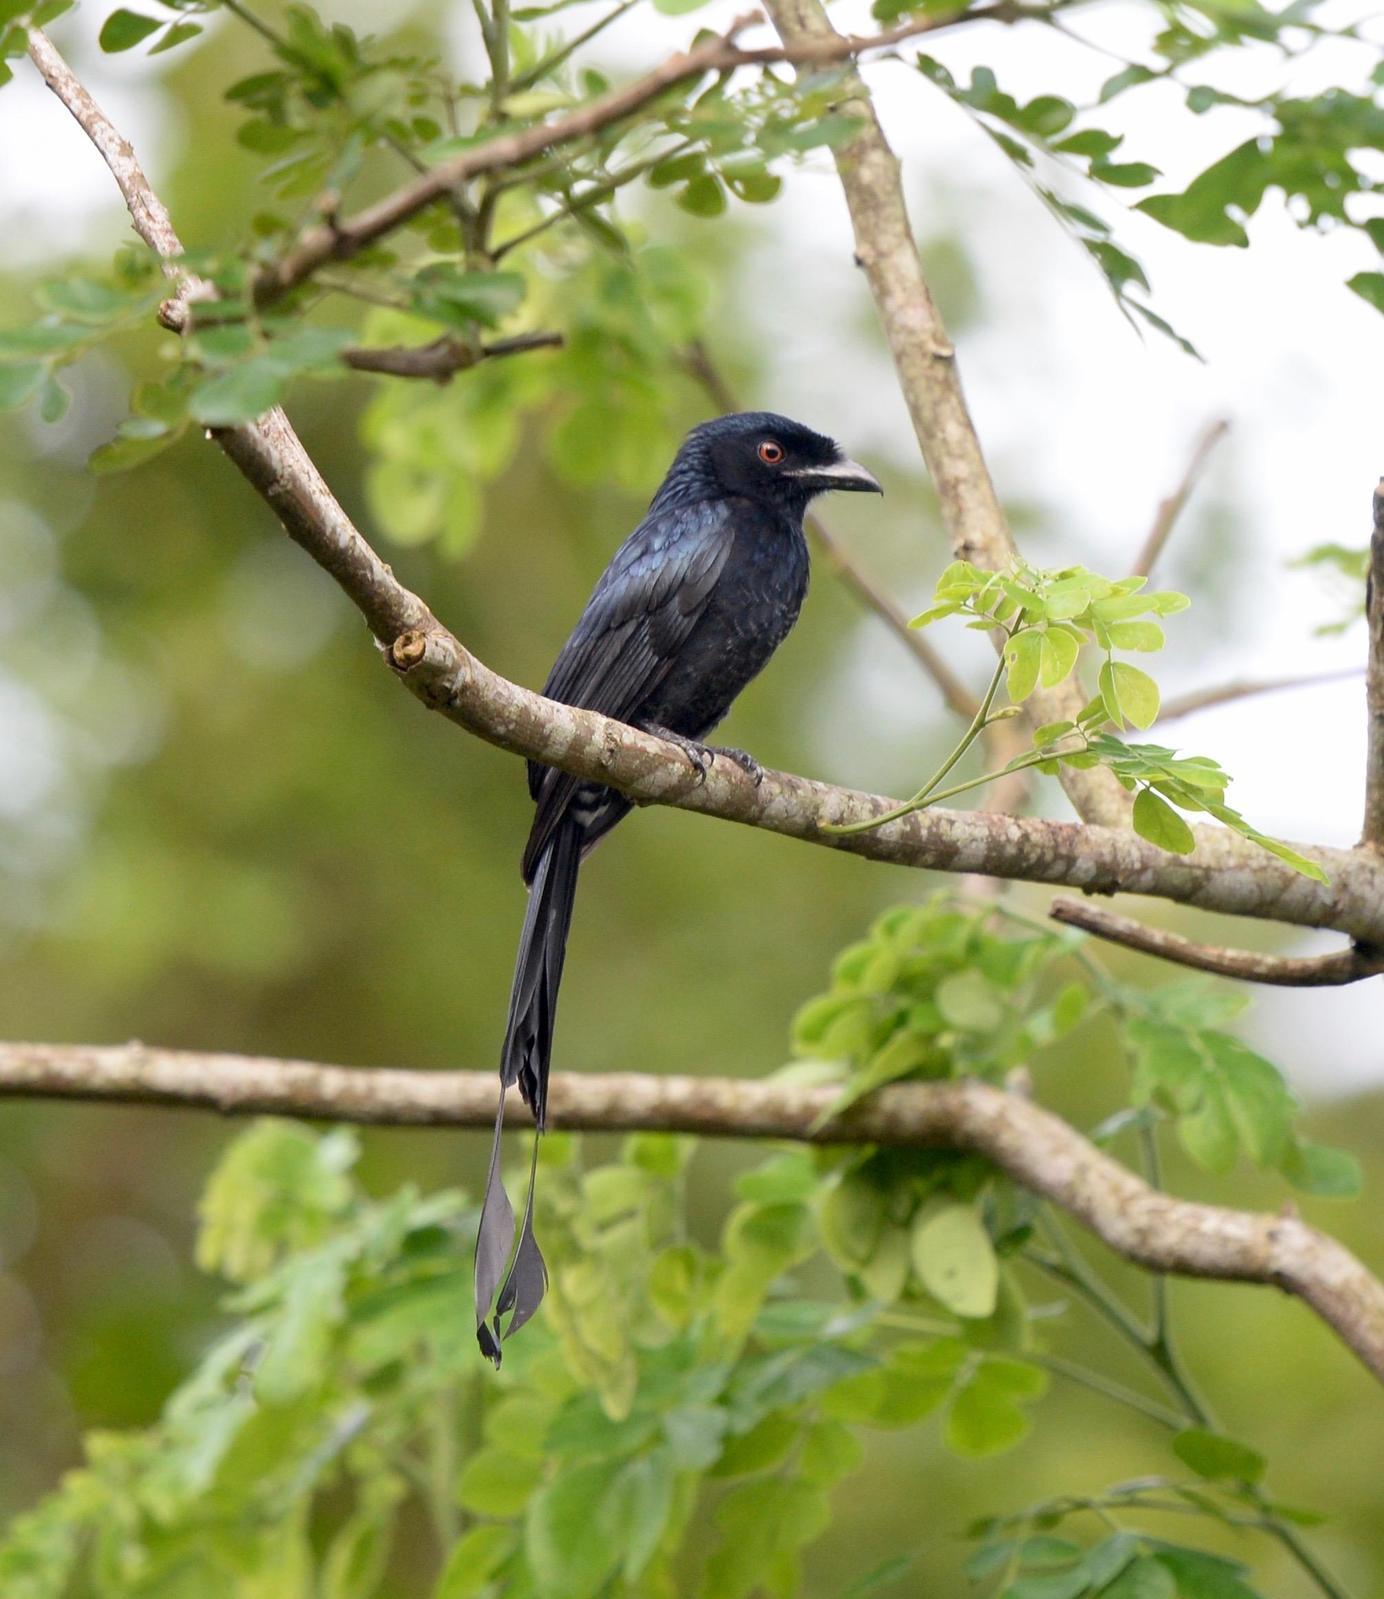 Greater Racket-tailed Drongo Photo by marcel finlay